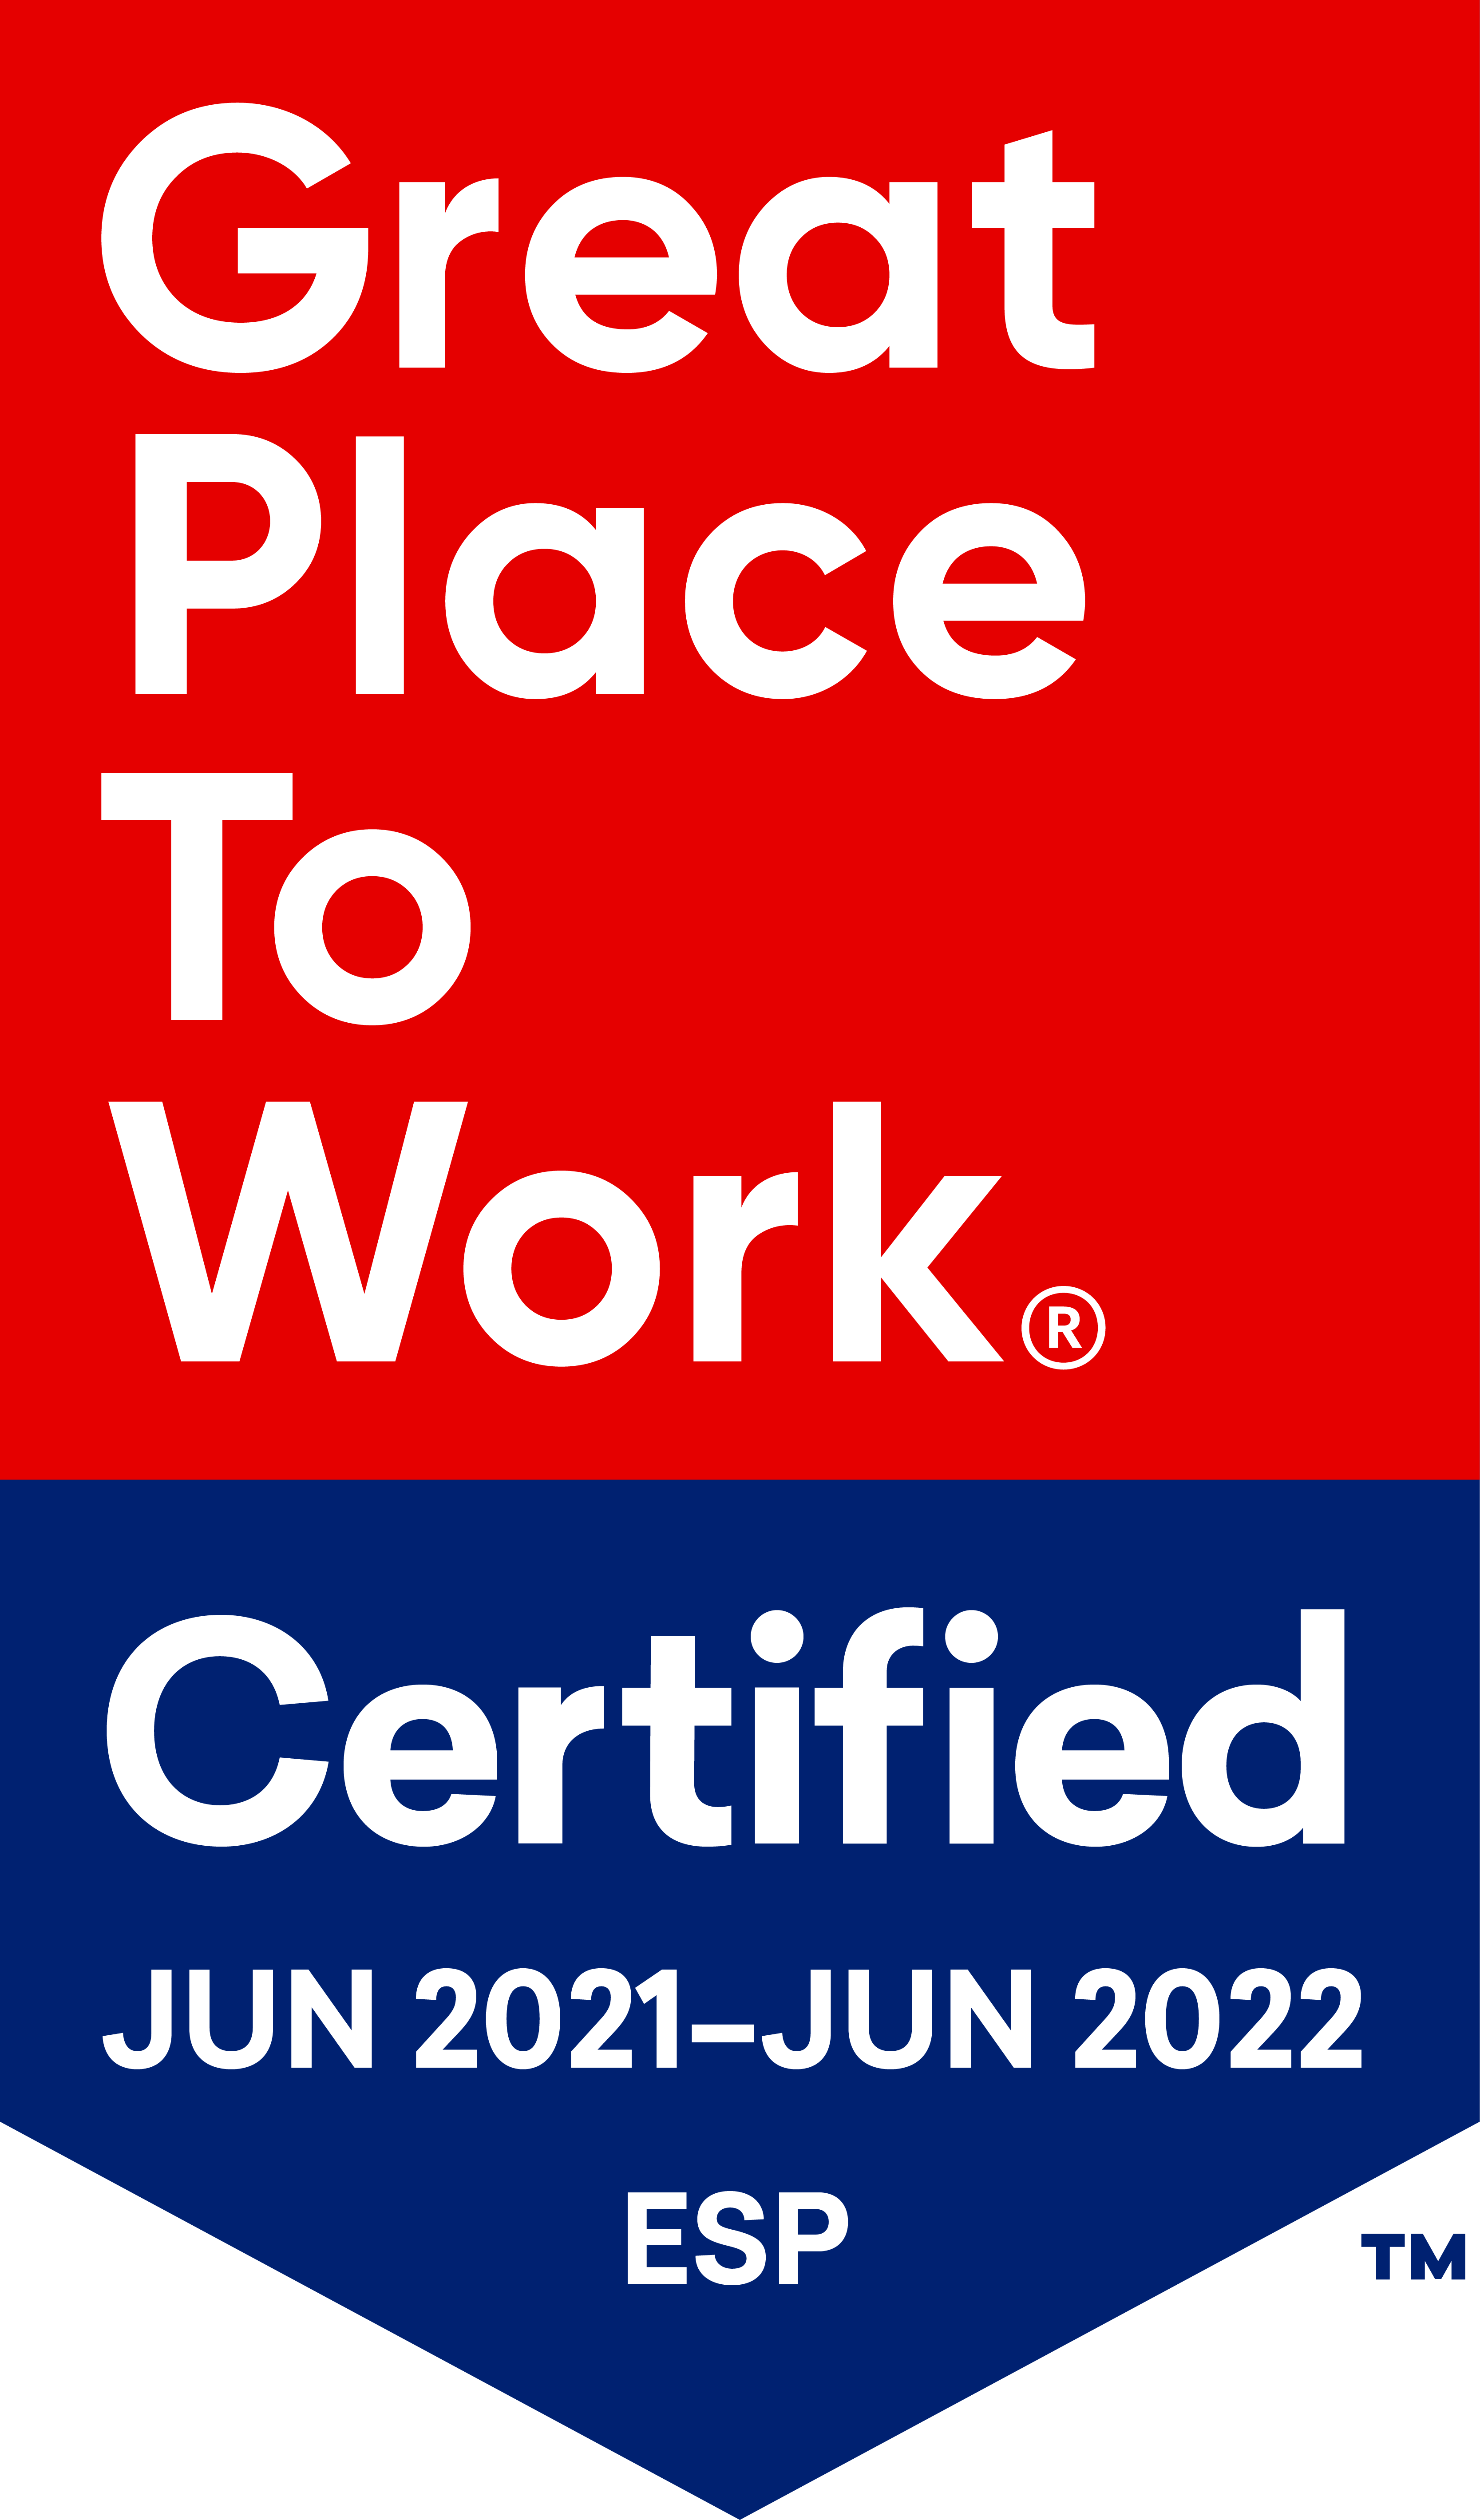 People, the center of everything. Our return is certified as GPTW Axazure